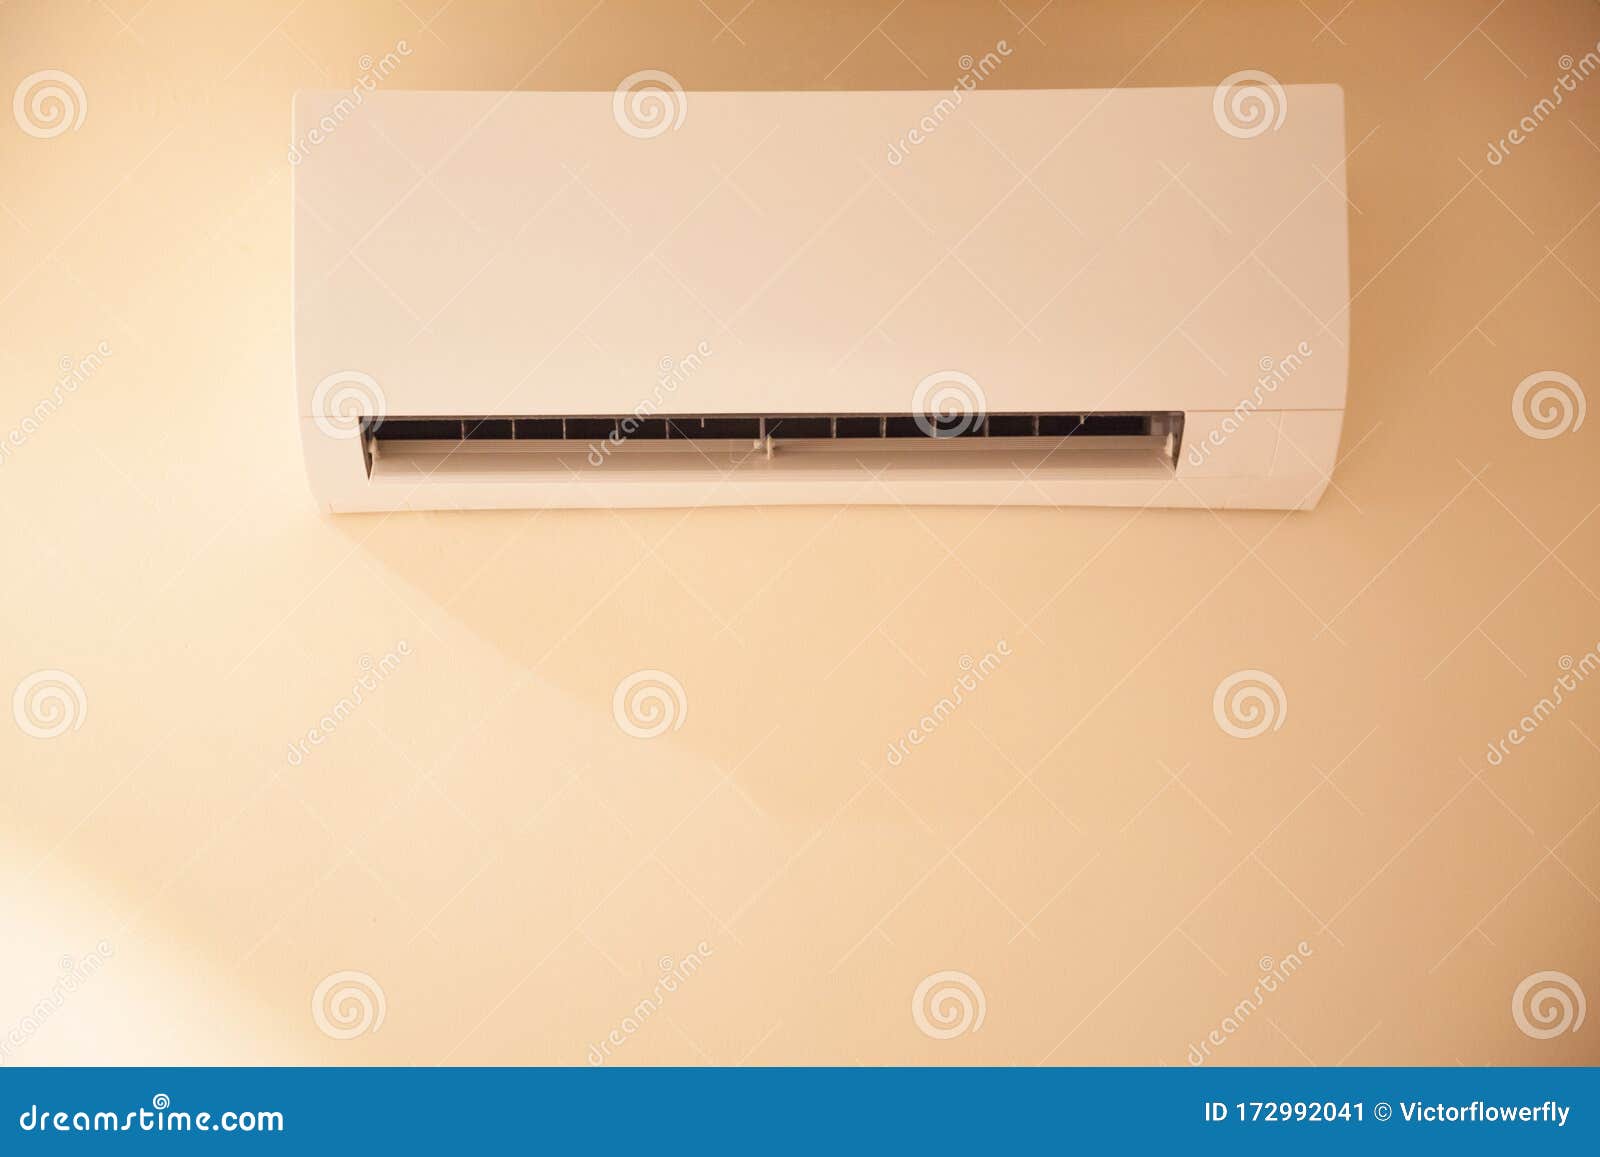 room wall air conditioner distribute conditioned air to improve thermal comfort and indoor air quality. air conditioning is